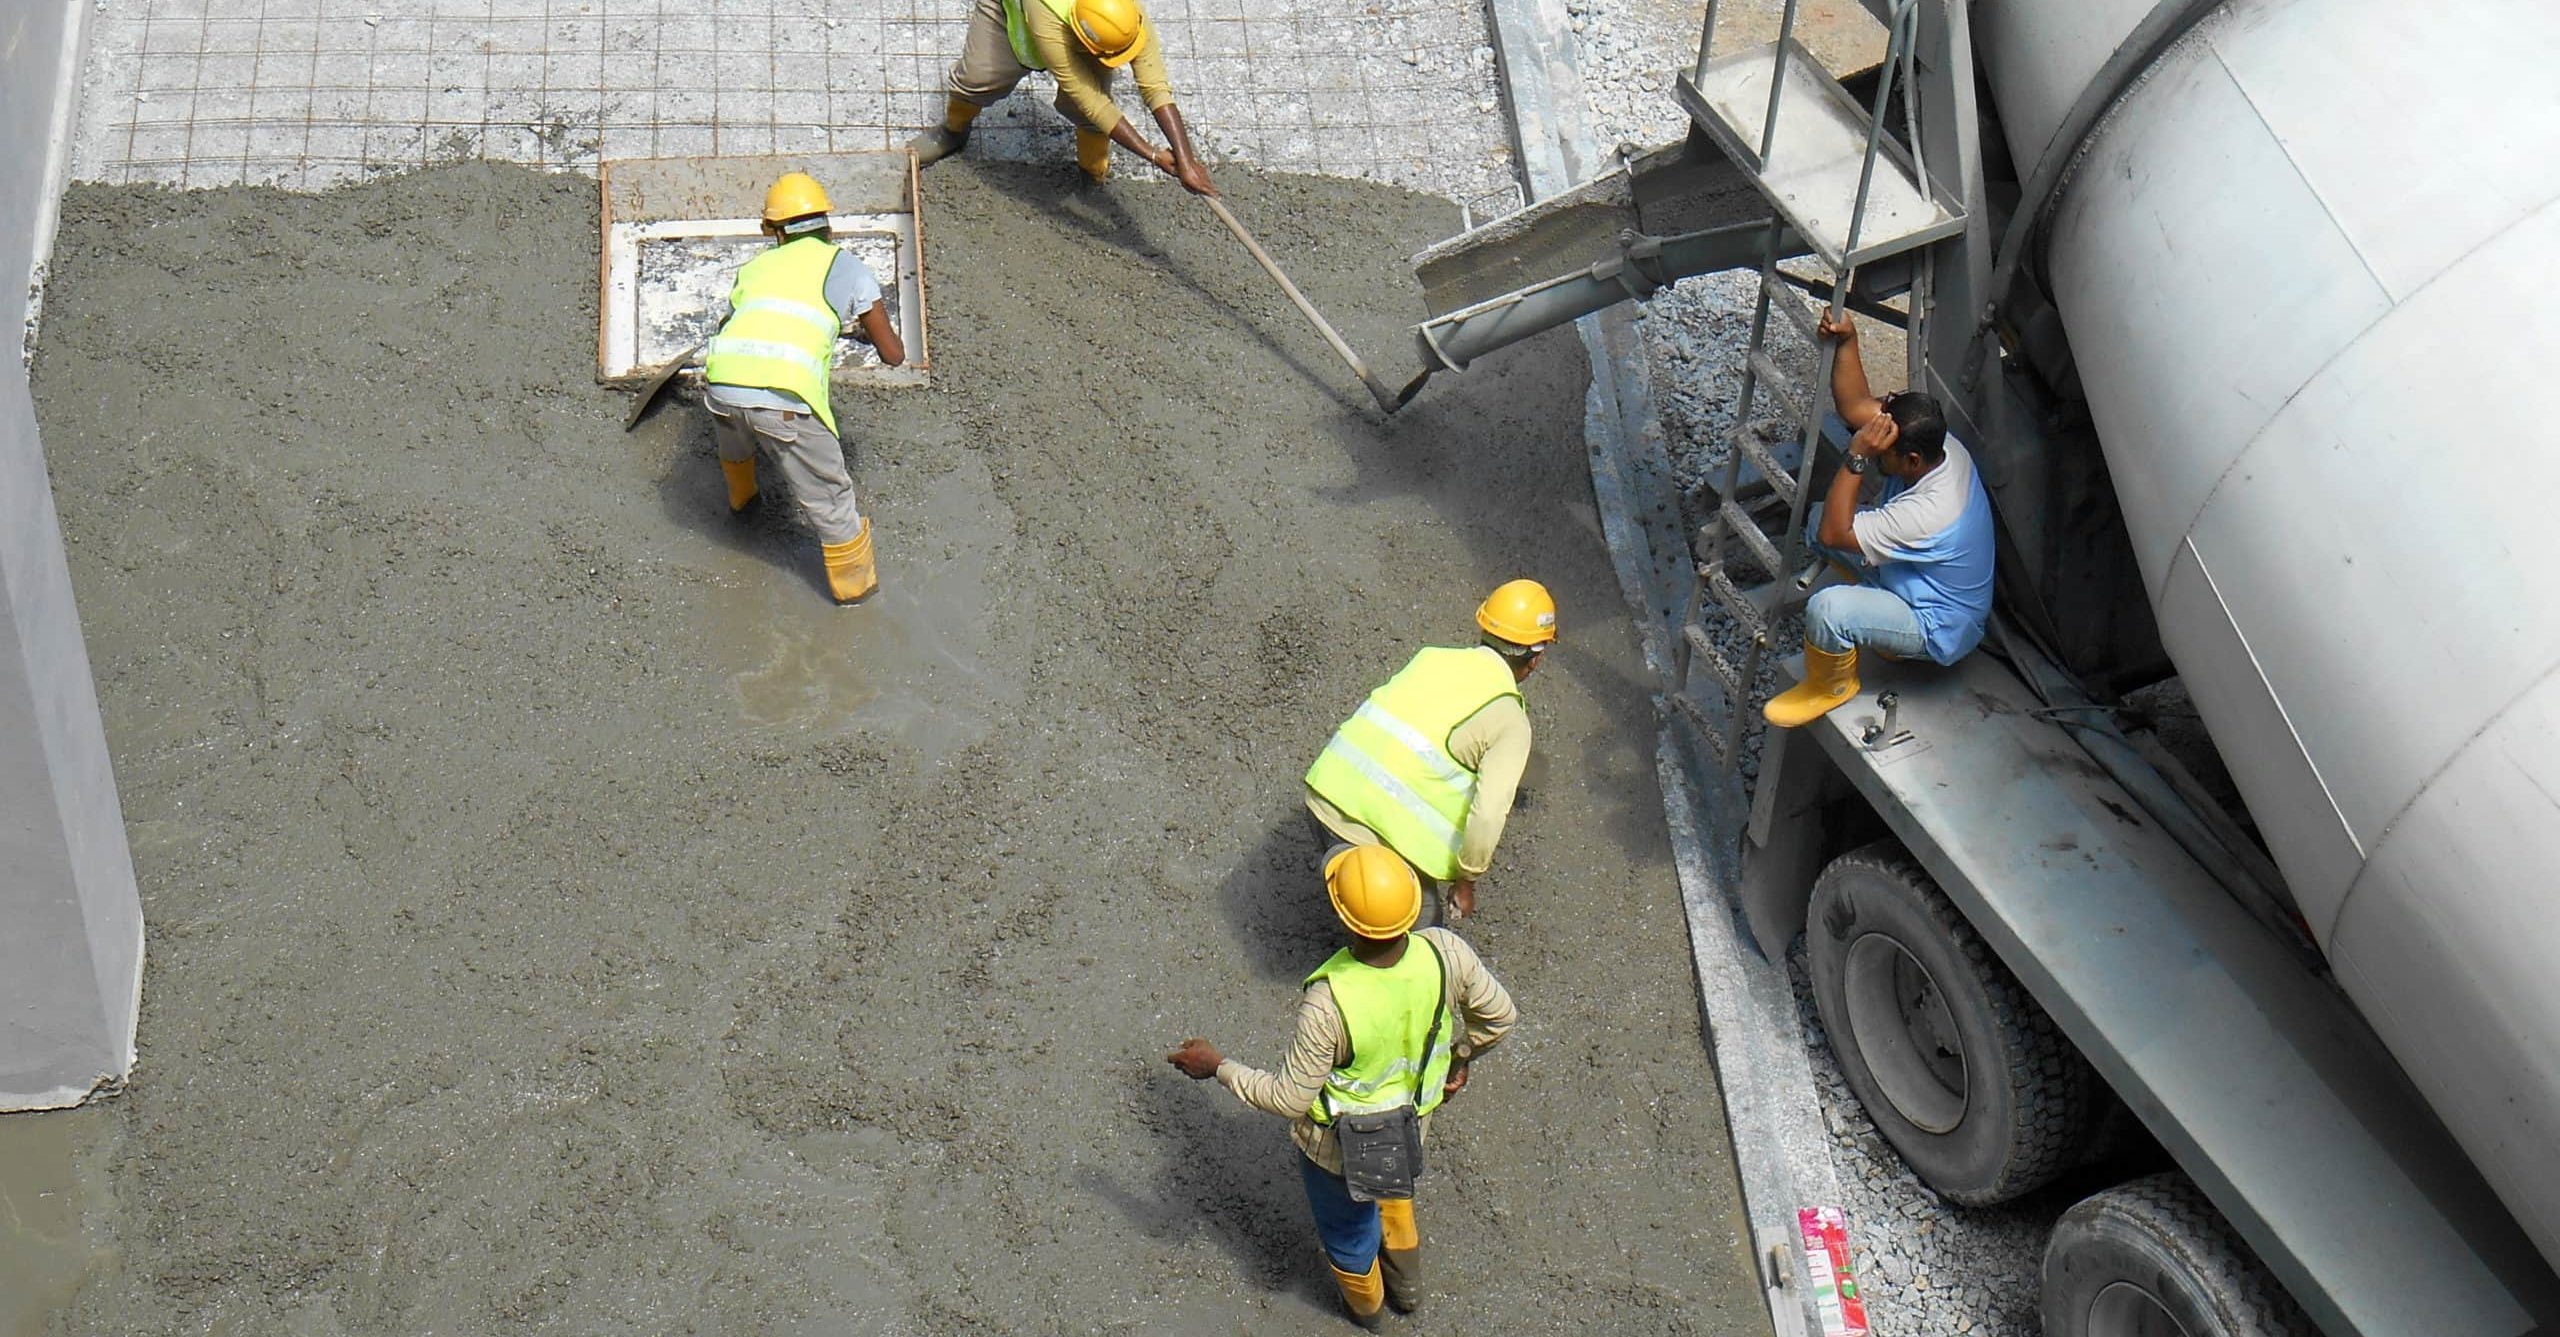 Construction workers leveling wet concrete has been poured. They also use a vibrator machine in this work.